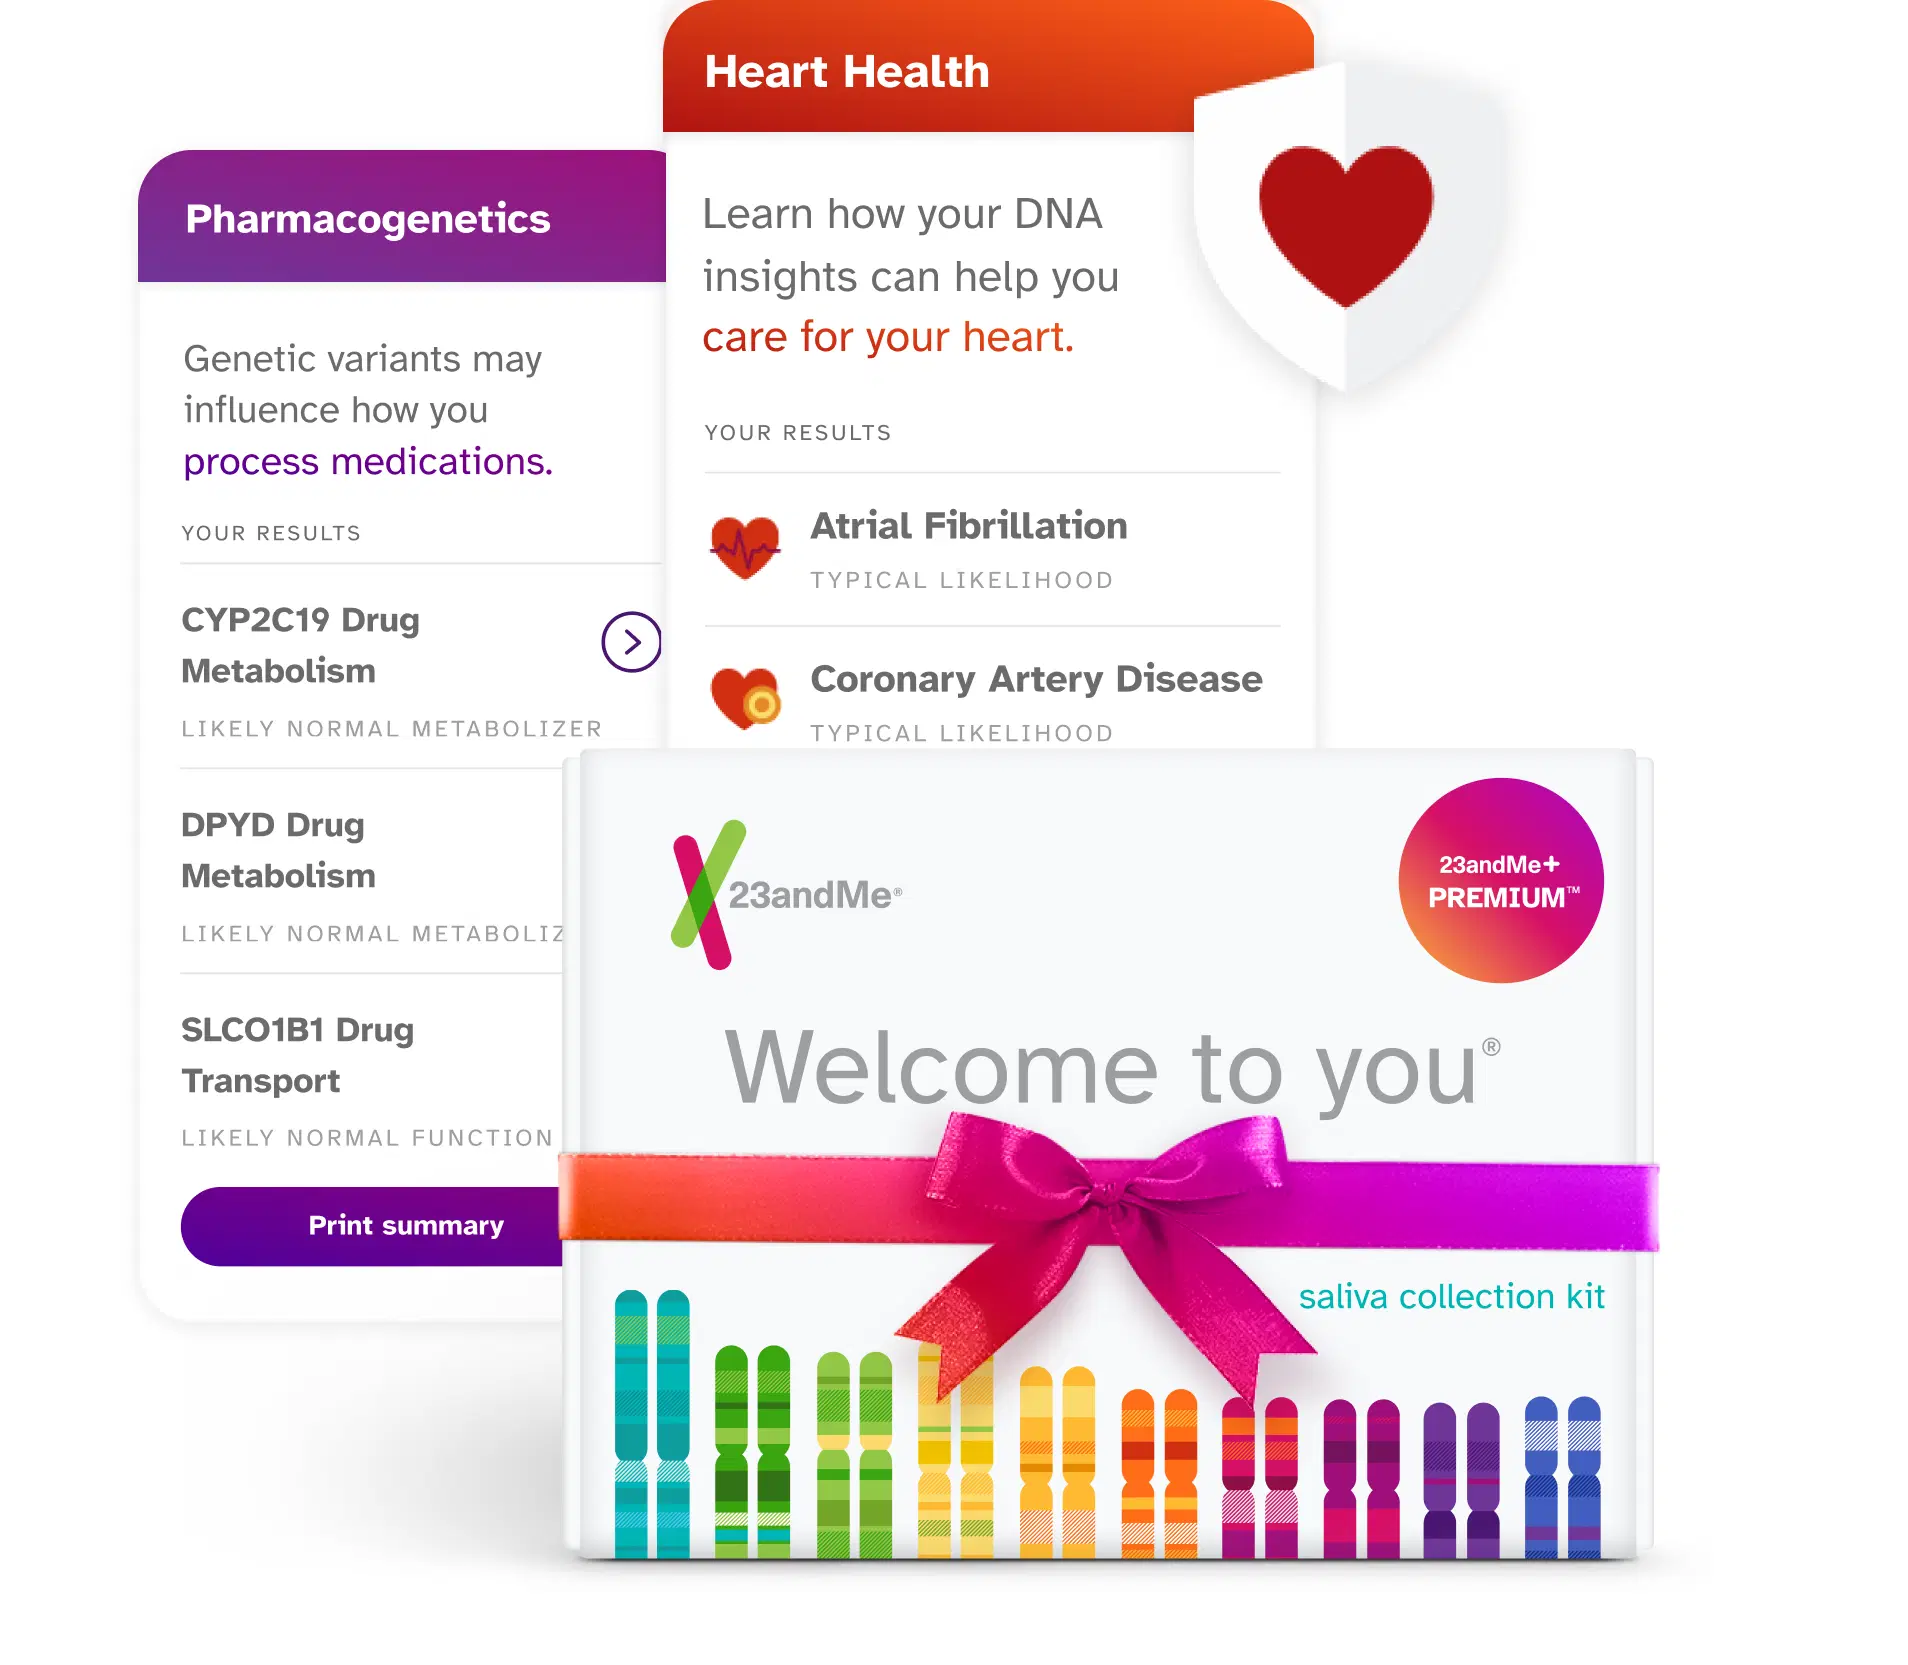 23andMe plus Premium saliva collection Kit with example reports Pharmacogenetics and Heart Health. Pharmacogenetics report displays genetic variants that may influence how you process medications. Example results include: CYP2C19 Drug Metabolism likely normal metabolizer, DPYD Drug Metabolism likely normal metabolizer, and SLCO1B1 Drug Transport likely normal function. Heart Health report displays how your DNA insights can help you care for your heart. Example results include: Atrial Fibrillation typical likelihood, Coronary Artery Disease typical likelihood.